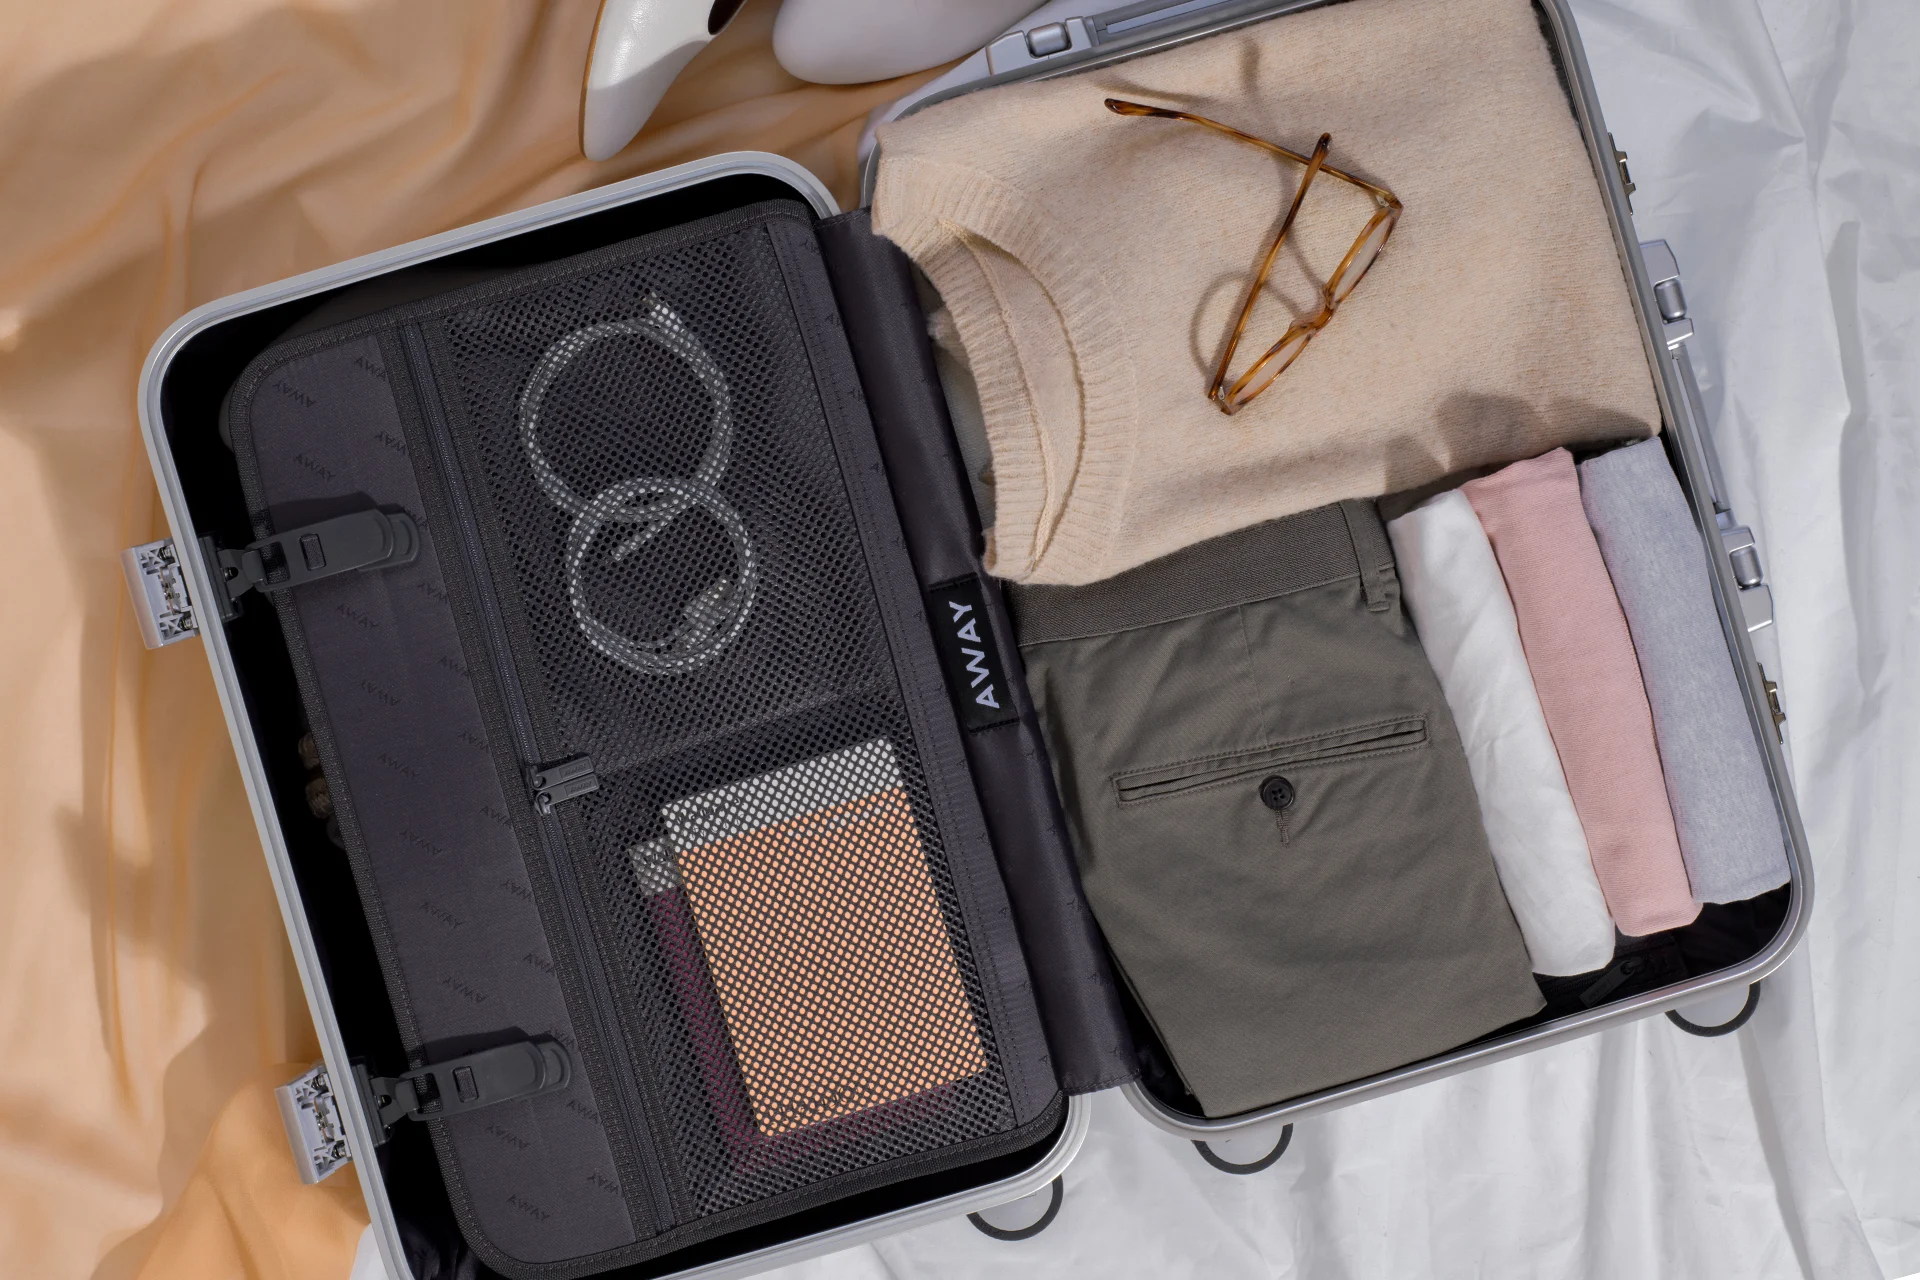 An Aluminum suitcase opened to reveal a clip in mesh pocketed panel folded clothes on the right side.